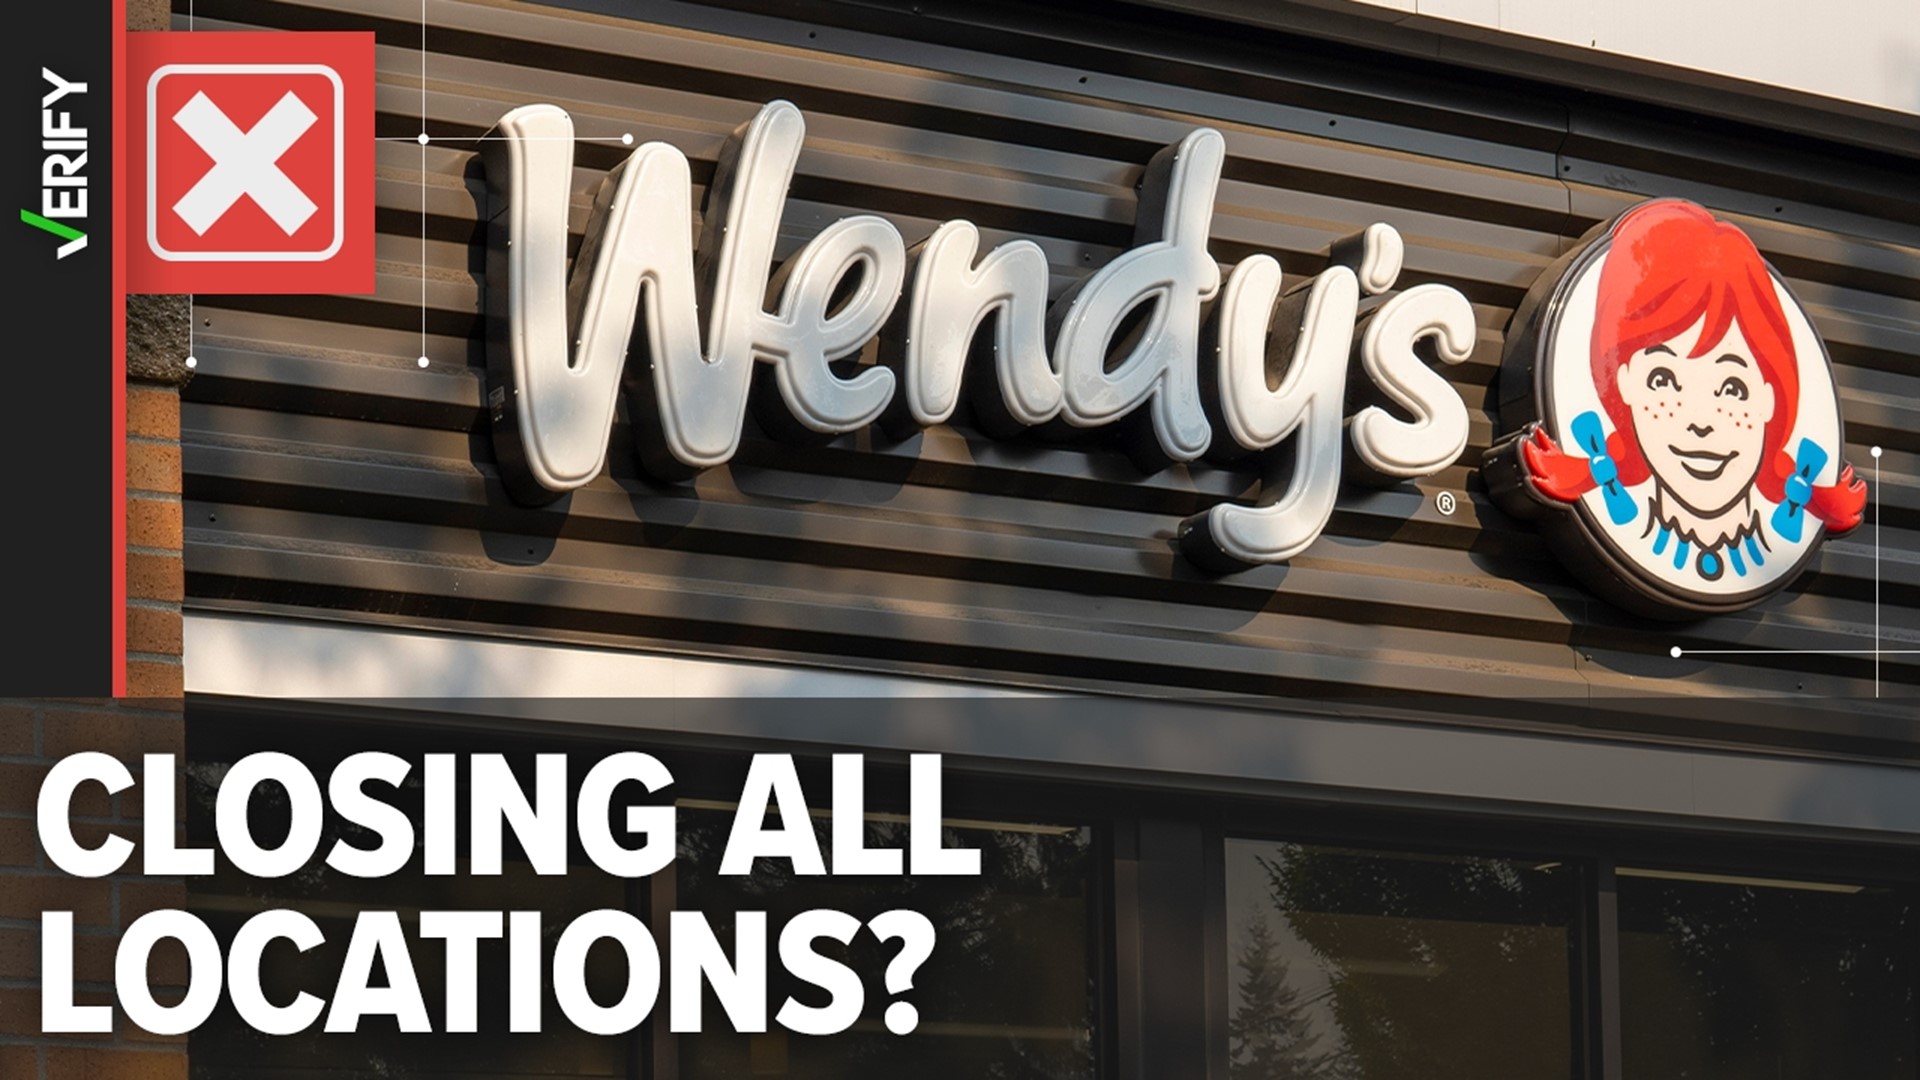 Social media rumors about Wendy’s closing down all of its restaurants nationwide are false.